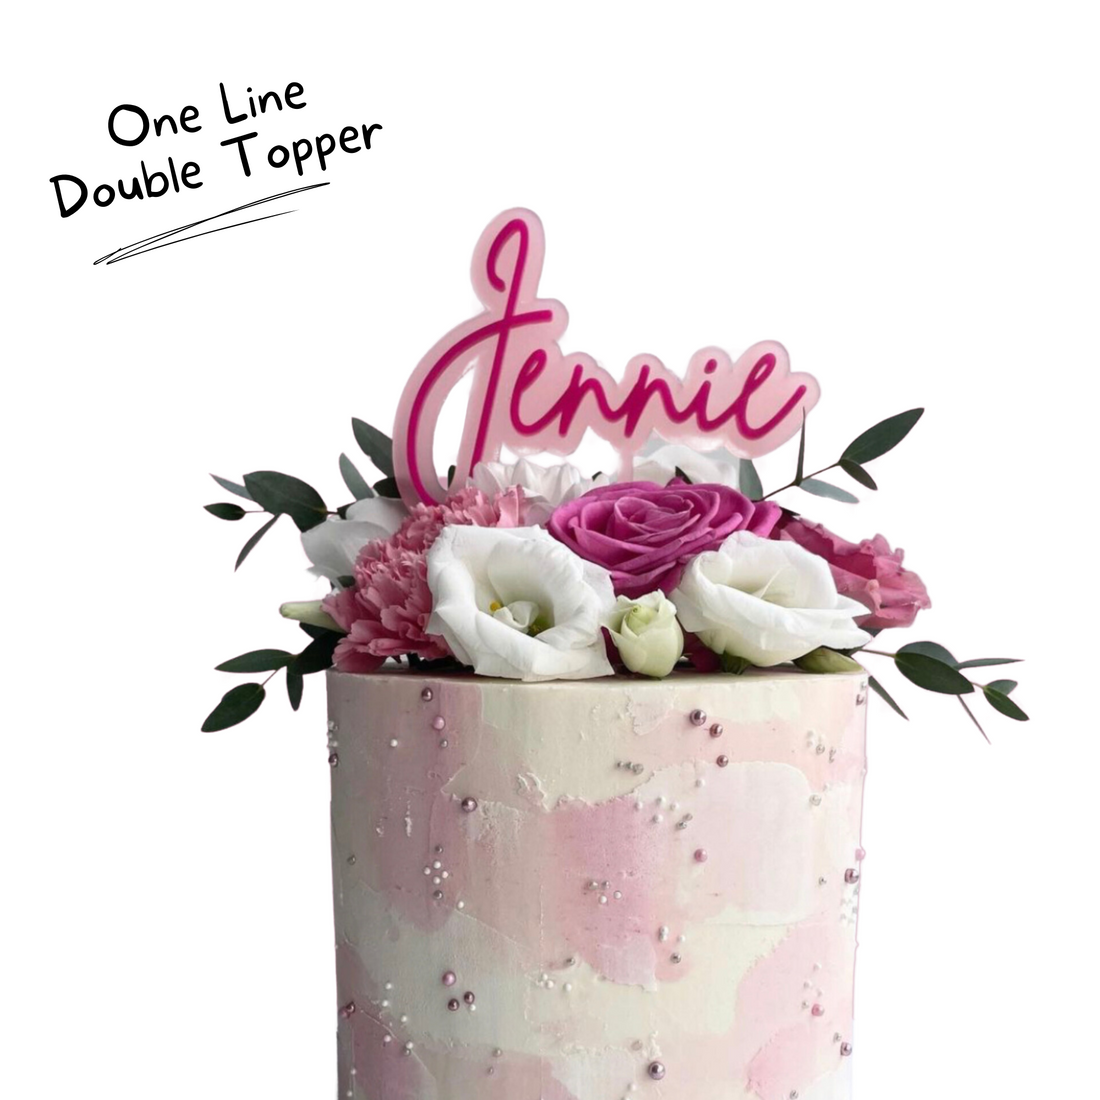 One Line Double Cake Topper